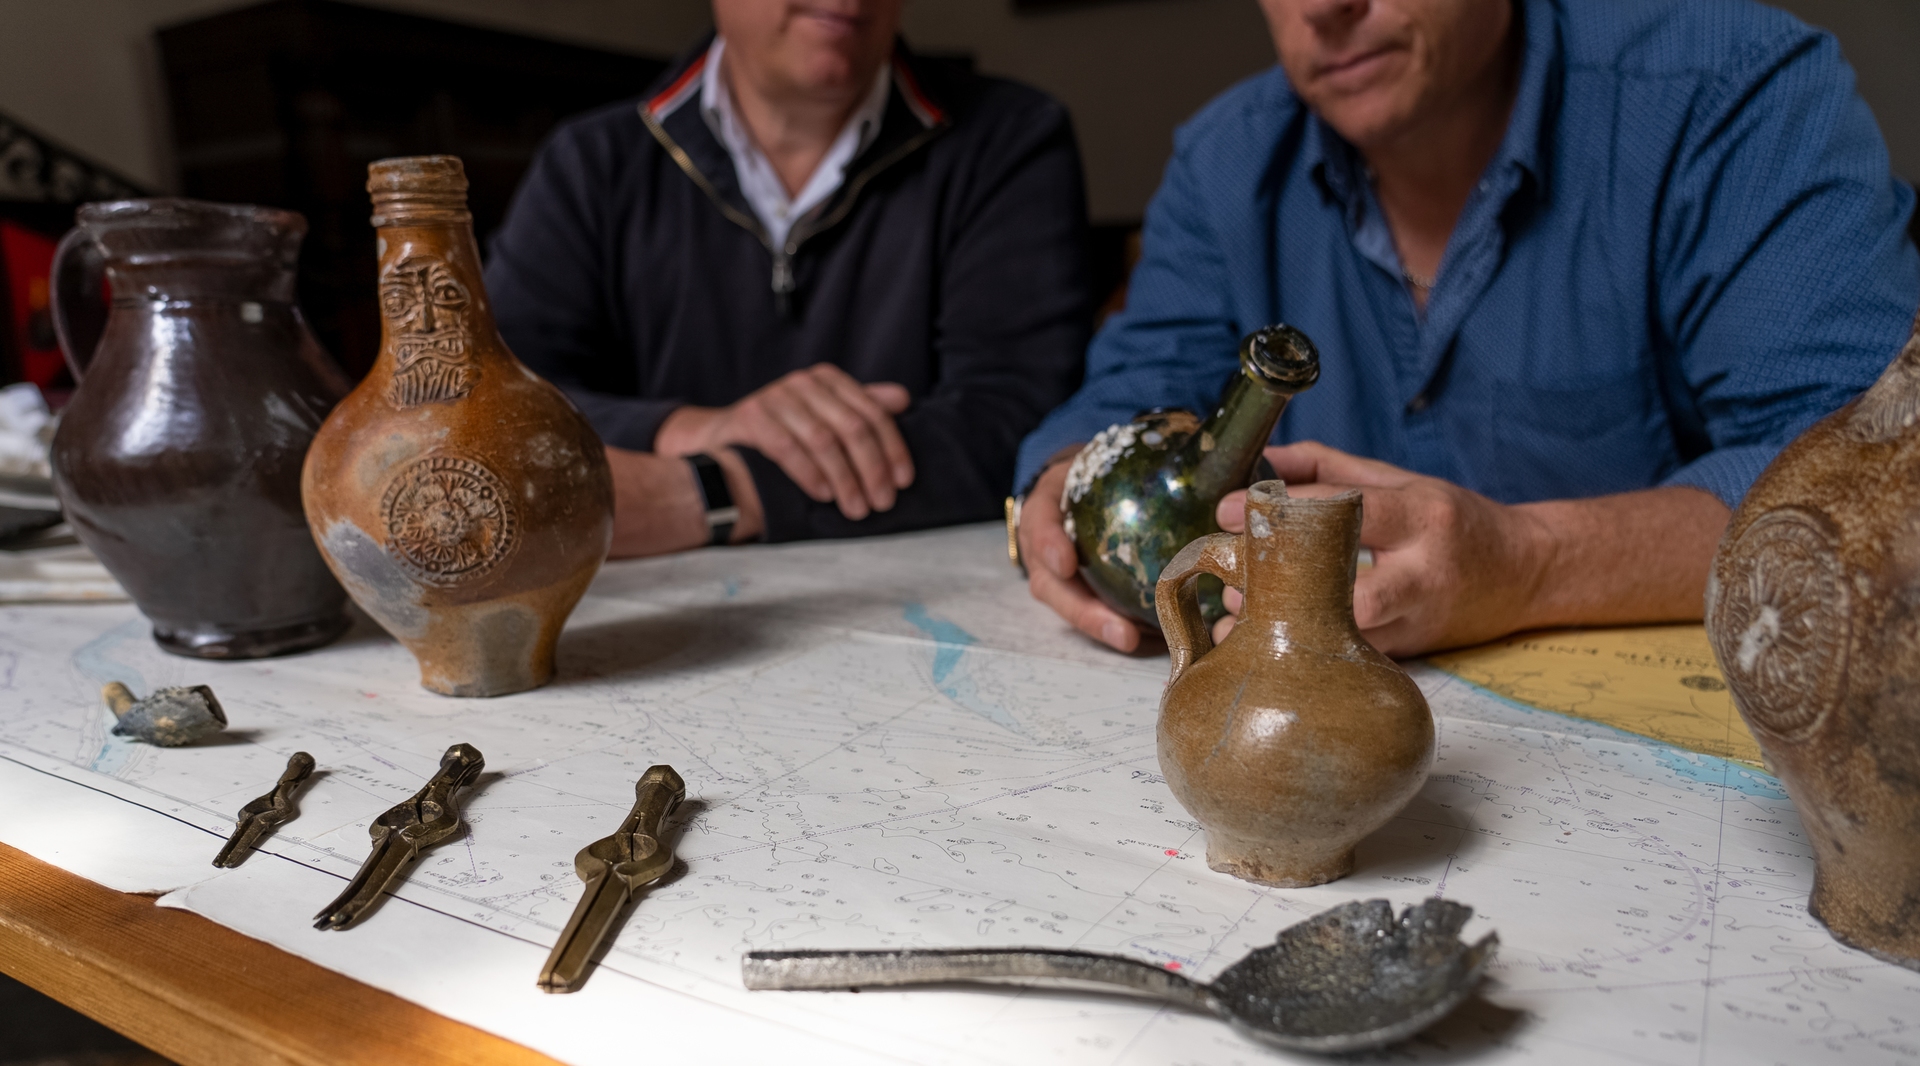 Pottery, utensils and unopened jugs of wine were among the items recovered from the site. (Image: UEA/Norfolk Historic Shipwrecks)